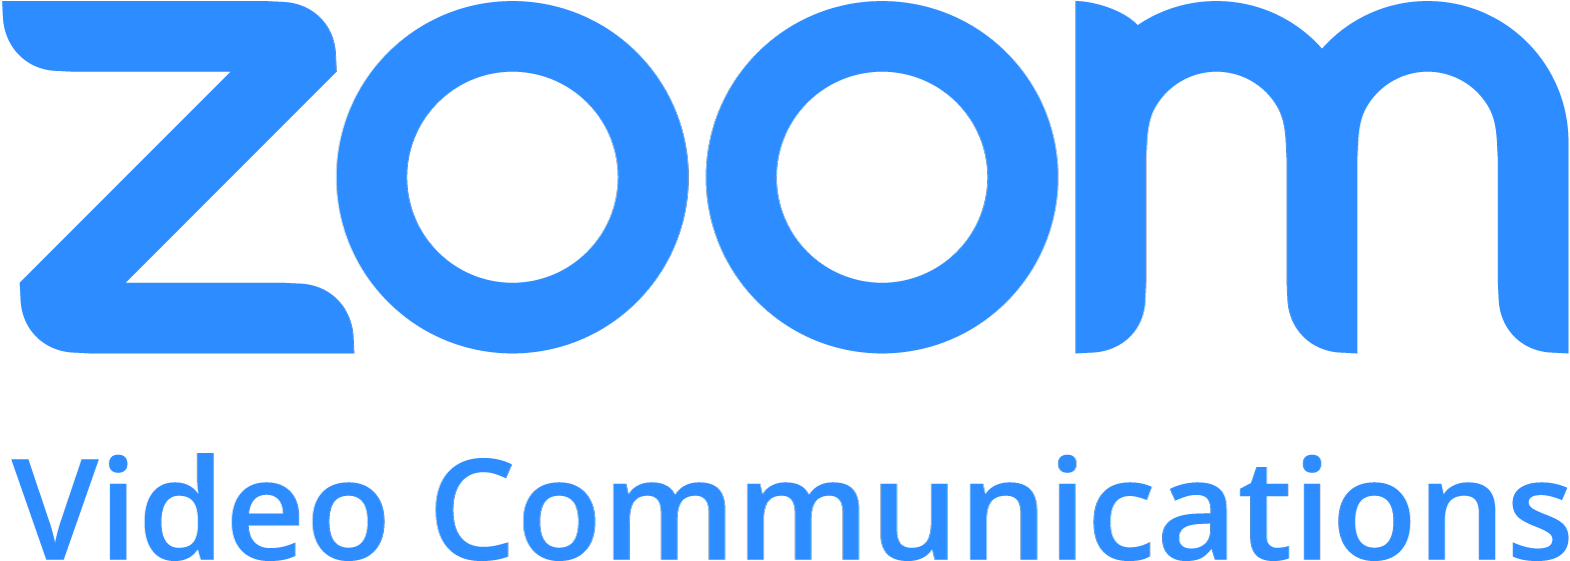 download zoom video communications zoom video transparent logo png #41647